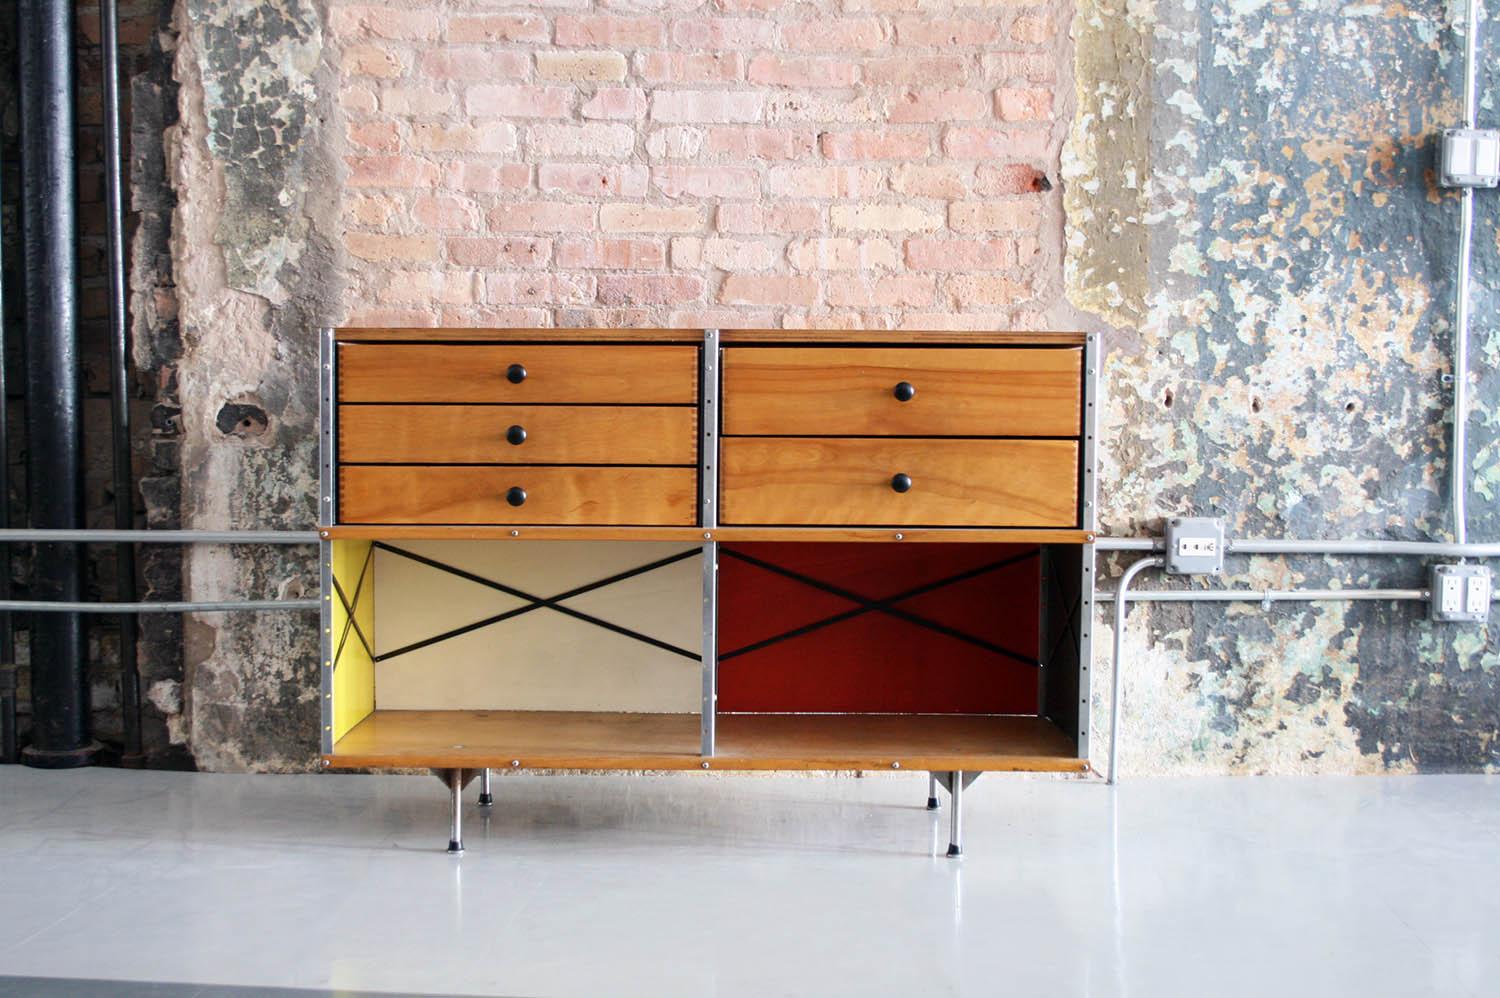 Here for your consideration is an original design by Ray and Charles Eames for Herman Miller 1950s USA. The ESU or 'Eames Storage Unit' this one is a second generation of the original design, distinguishable by the style of legs seen here. The legs